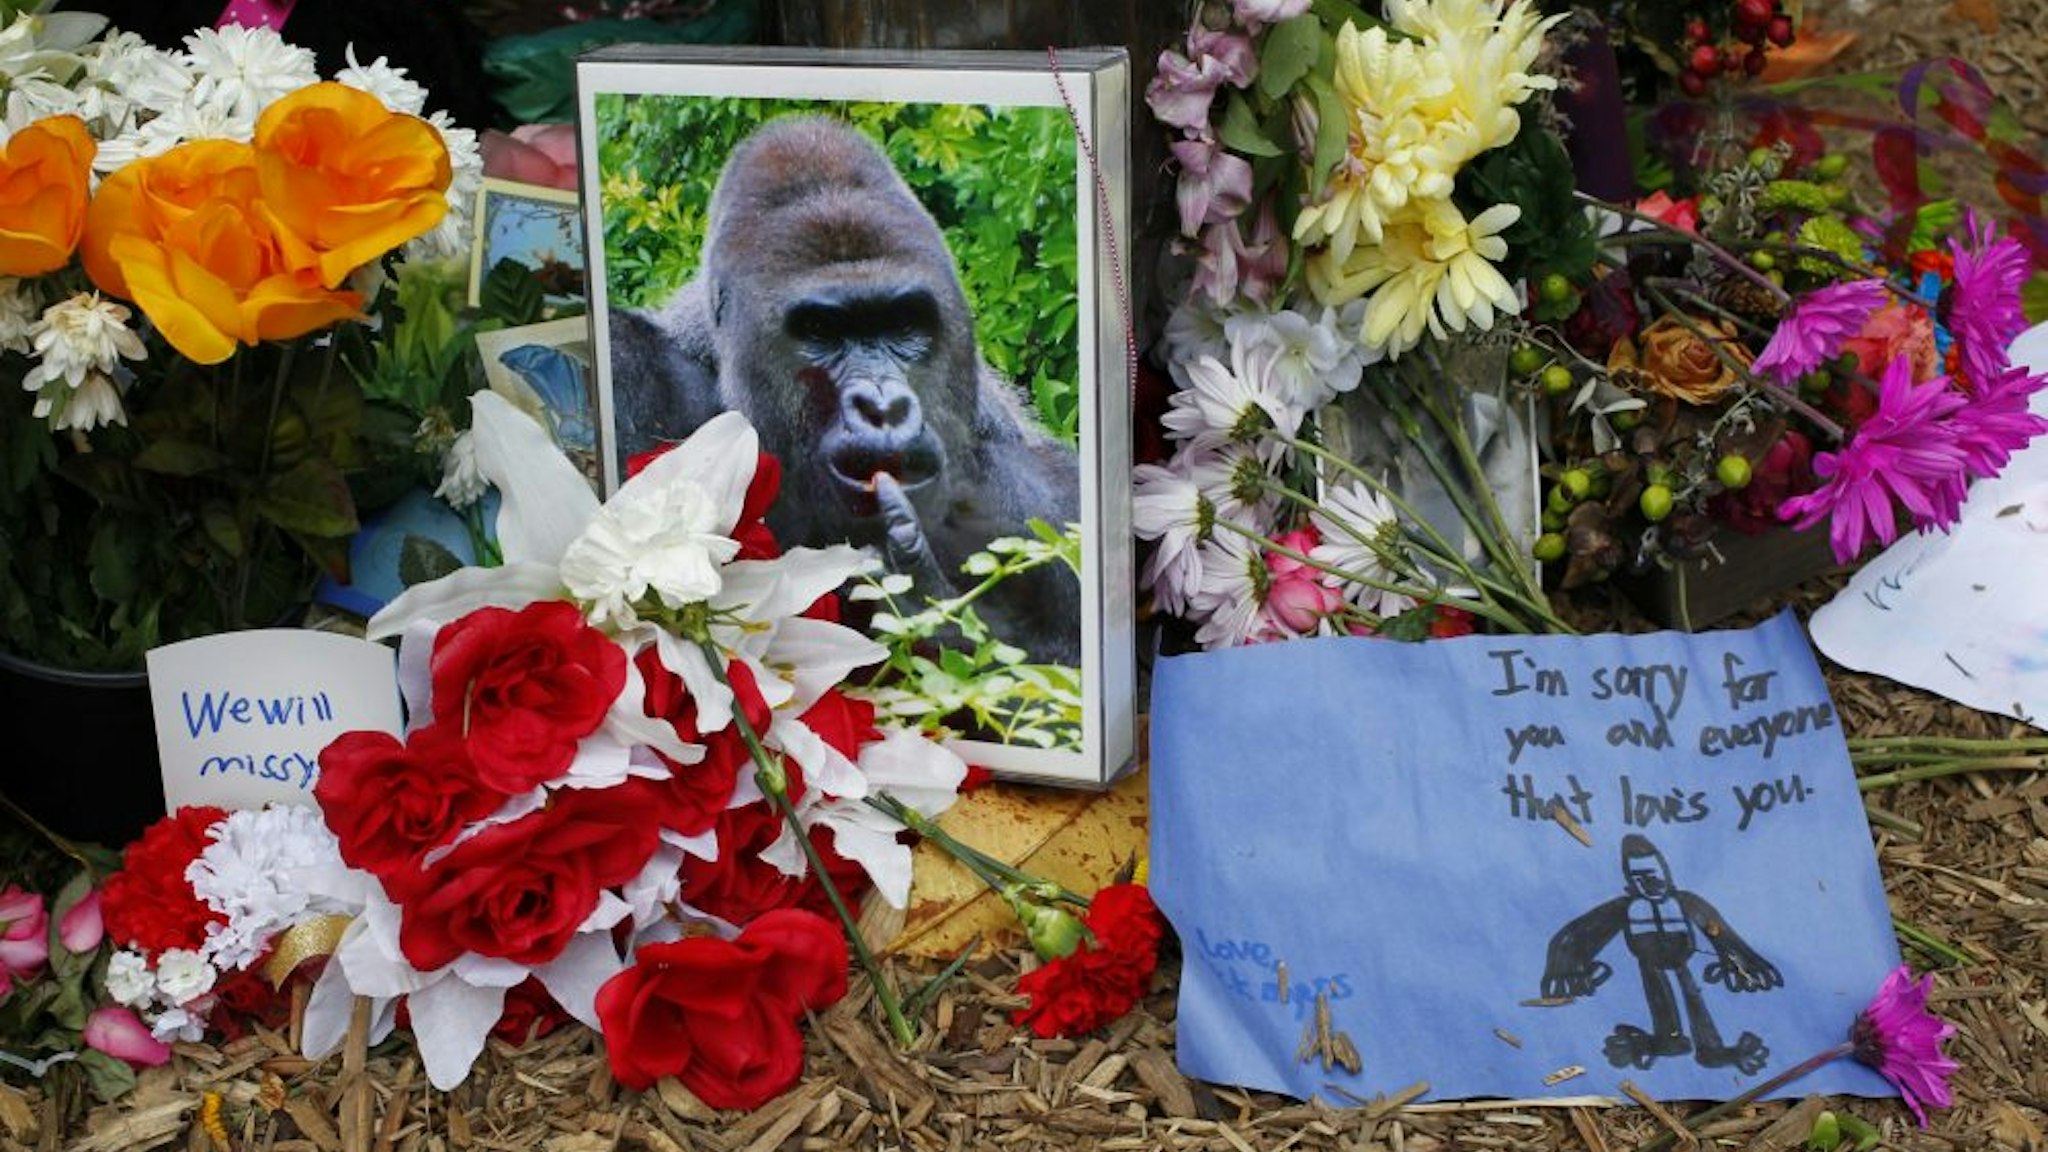 CINCINNATI, OH - JUNE 2: Flowers lay around a bronze statue of a gorilla and her baby outside the Cincinnati Zoo's Gorilla World exhibit days after a 3-year-old boy fell into the moat and officials were forced to kill Harambe, a 17-year-old Western lowland silverback gorilla June 2, 2016 in Cincinnati, Ohio. The exhibit is still closed as Zoo official work to up grade safety features of the exhibit.